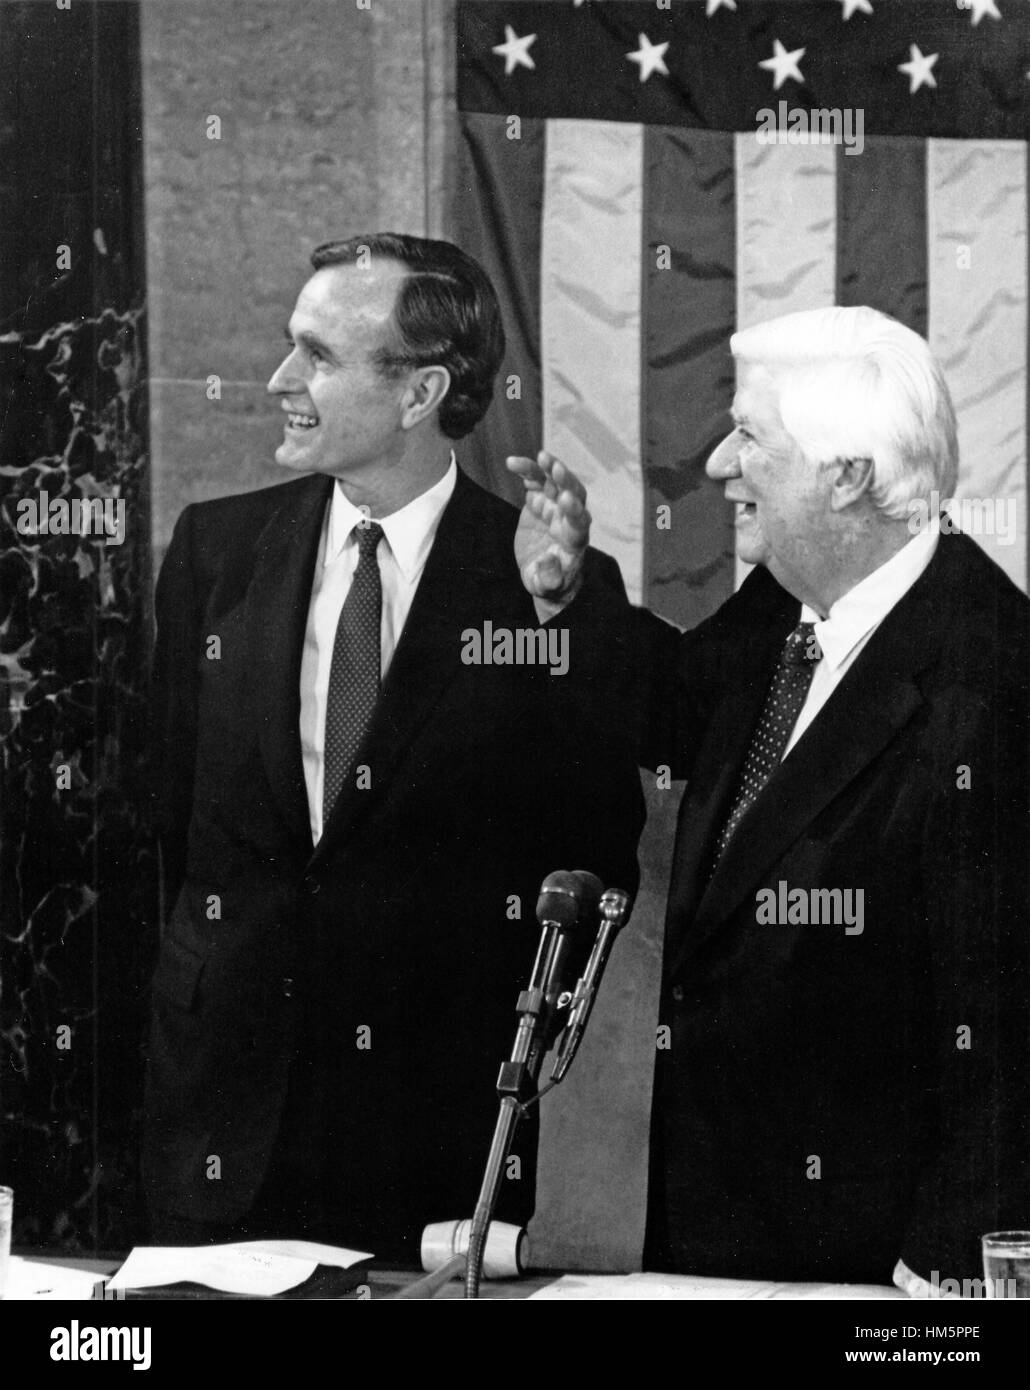 United States Vice President George H.W. Bush, left, and the Speaker of the US House of Representatives Thomas P. 'Tip' O'Neill (Democrat of Massachusetts), right, shortly before the arrival of US President Ronald Reagan who is scheduled to deliver his St Stock Photo